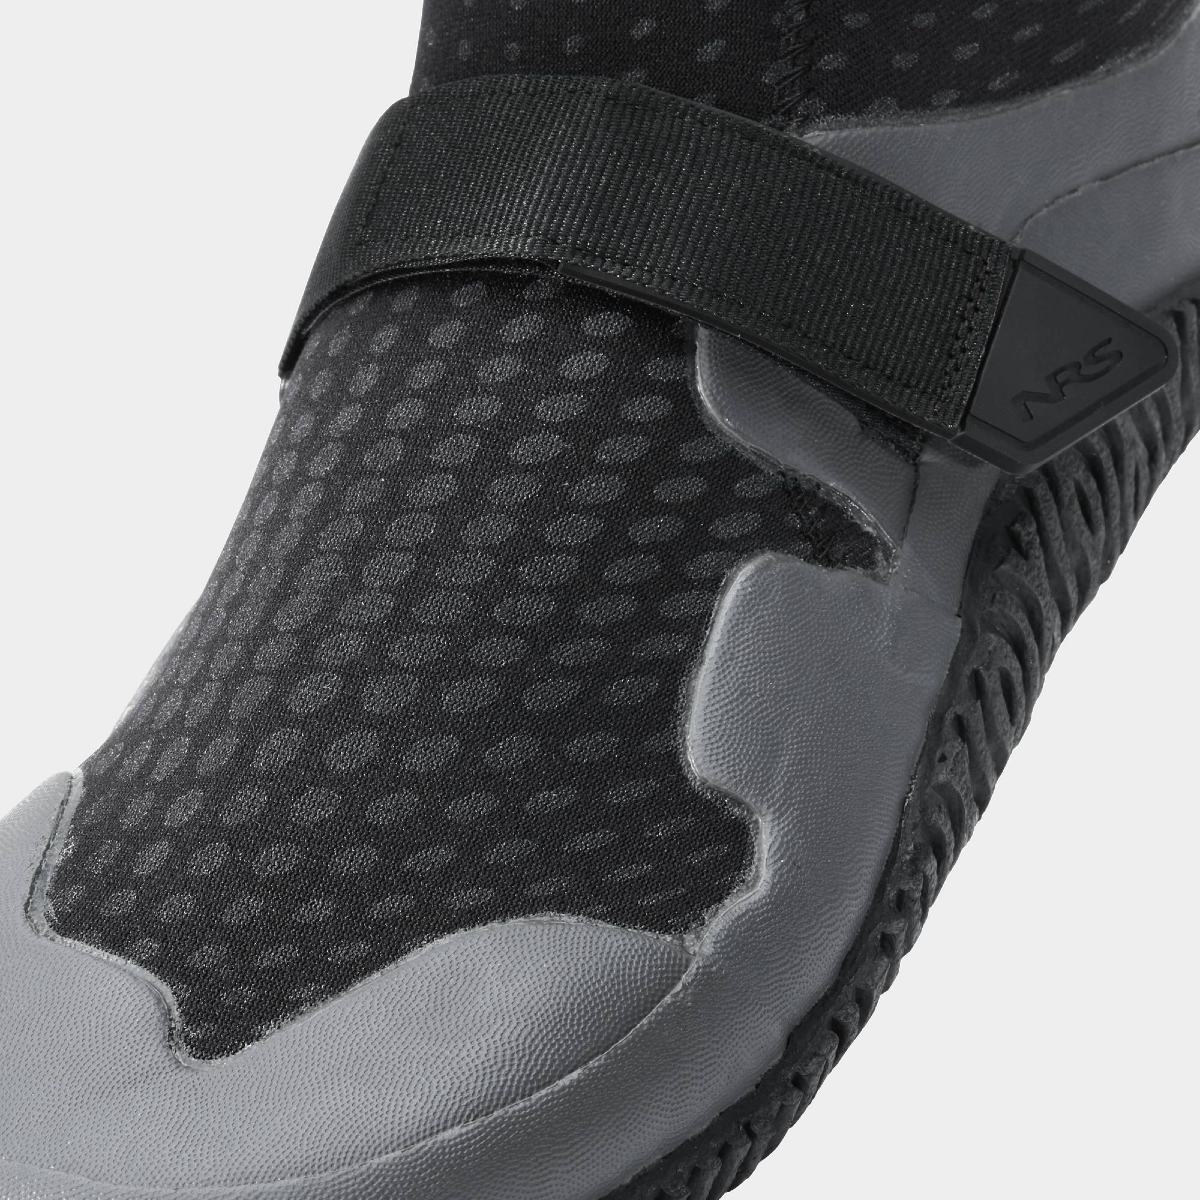 NRS Paddle Neoprene Shoes